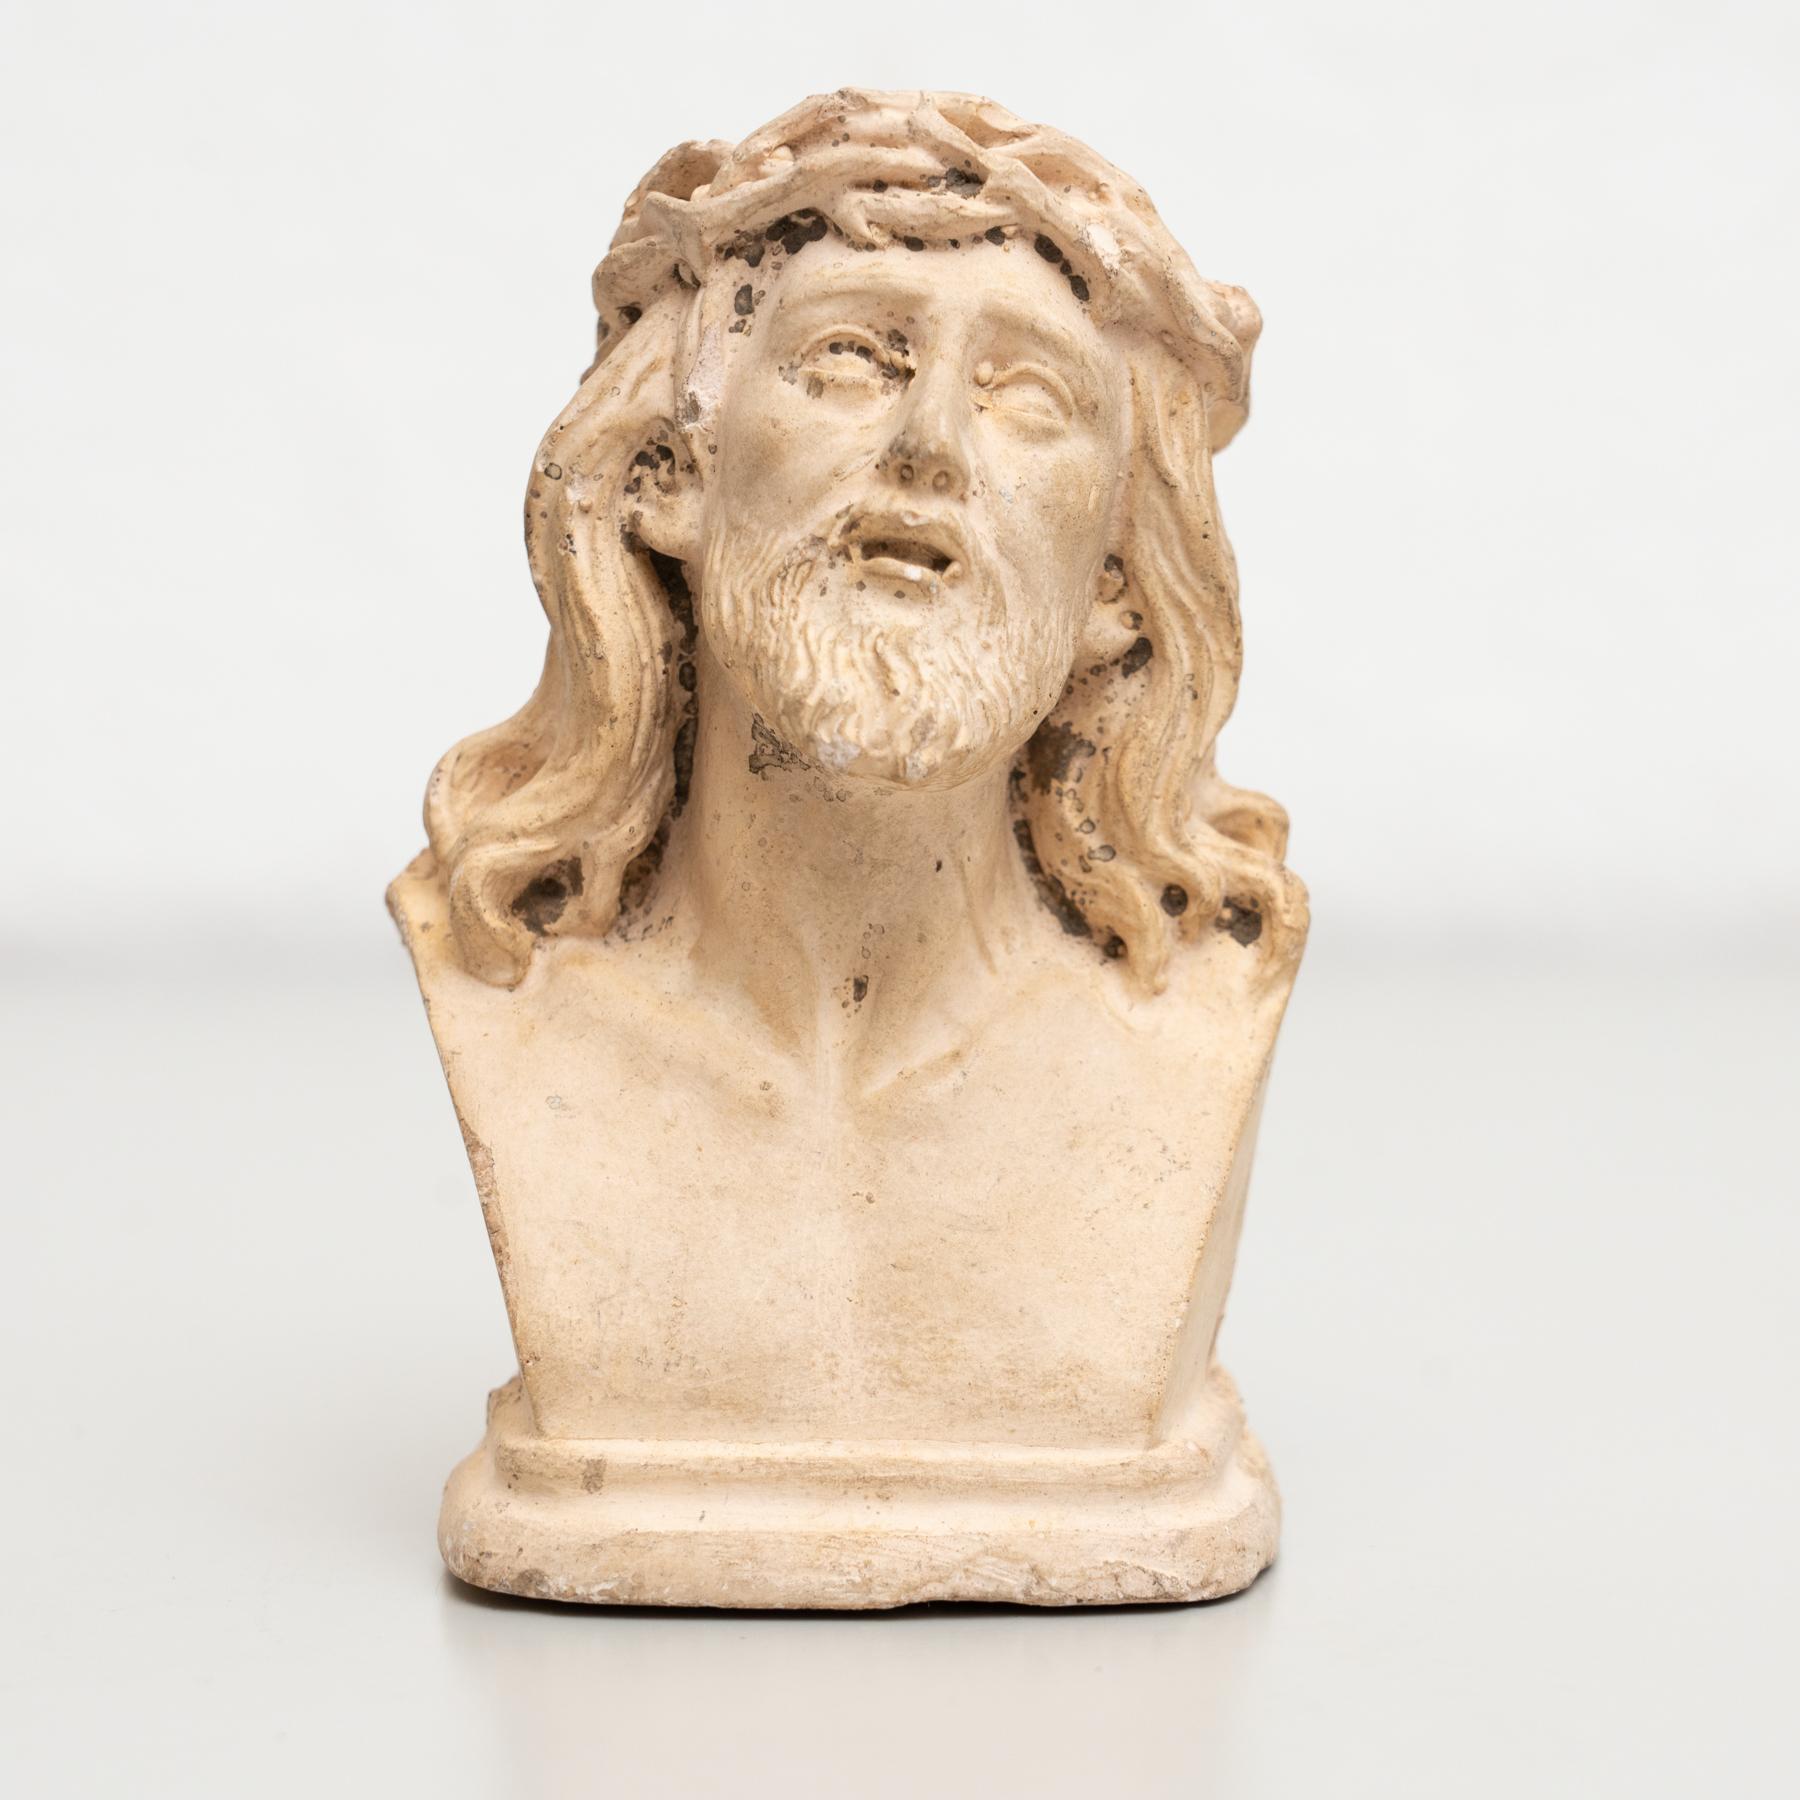 Traditional religious plaster figure of Jesus Christ.

Made in traditional Catalan atelier in Olot, Spain, circa 1950.

In original condition, with minor wear consistent with age and use, preserving a beautiful patina.

Materials:
Plaster.
 